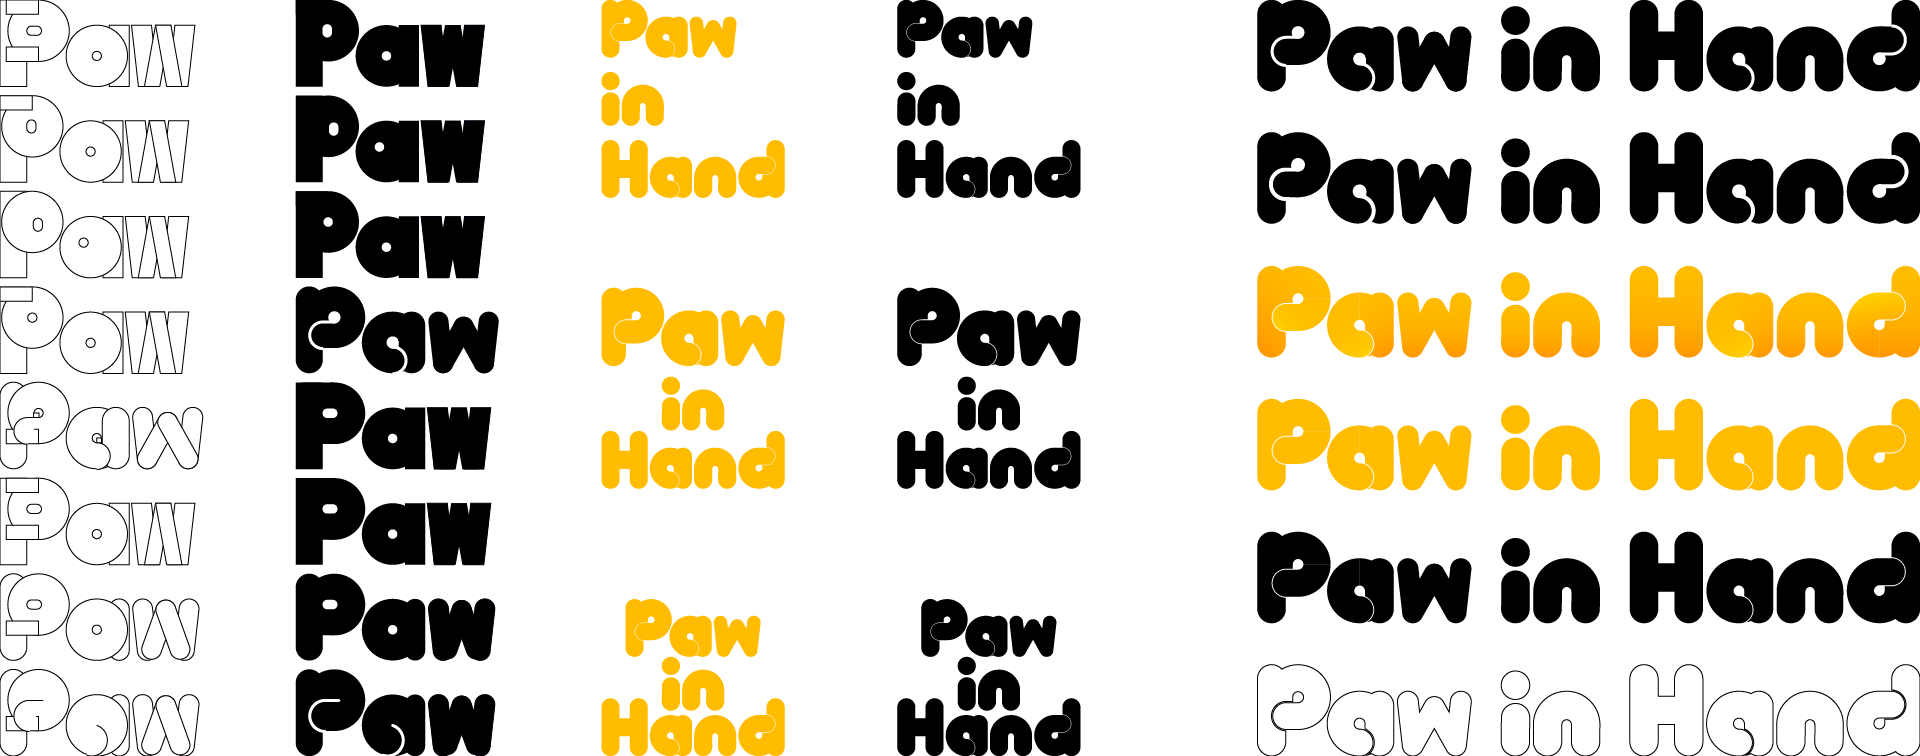 paw in hand logo process